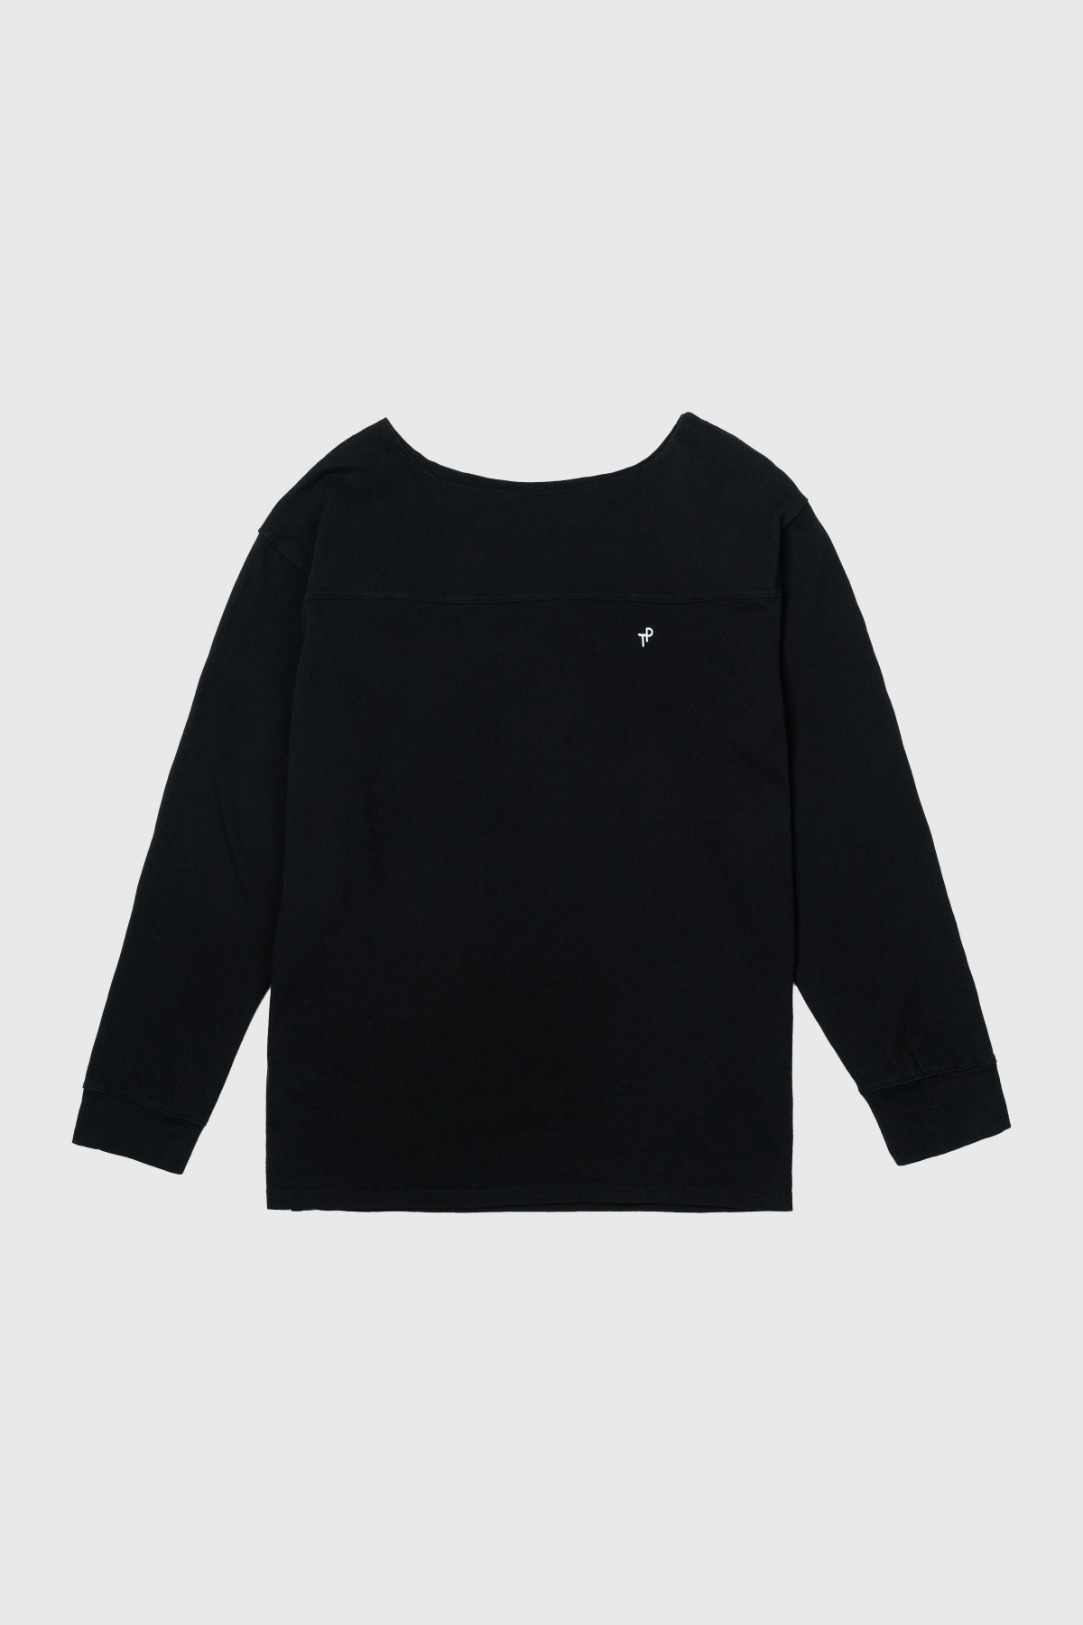 TP BOATNECK T-SHIRT (2nd Re-open)